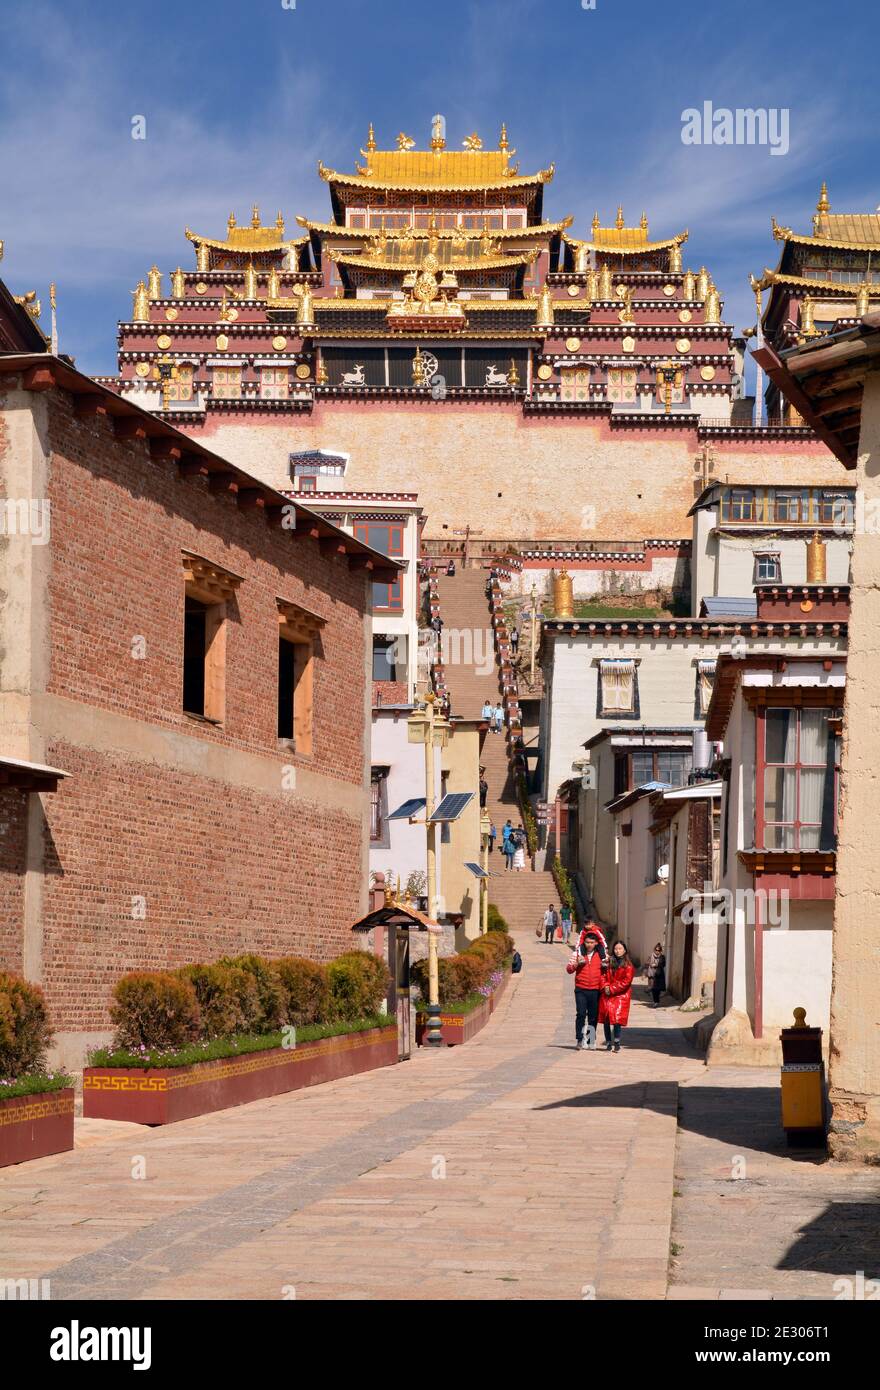 Sumtseling monastery high above the city of Shangri La, Yunnan. Tibetan buddhist style with gold topped buildings. Entrance with steps going up. Stock Photo